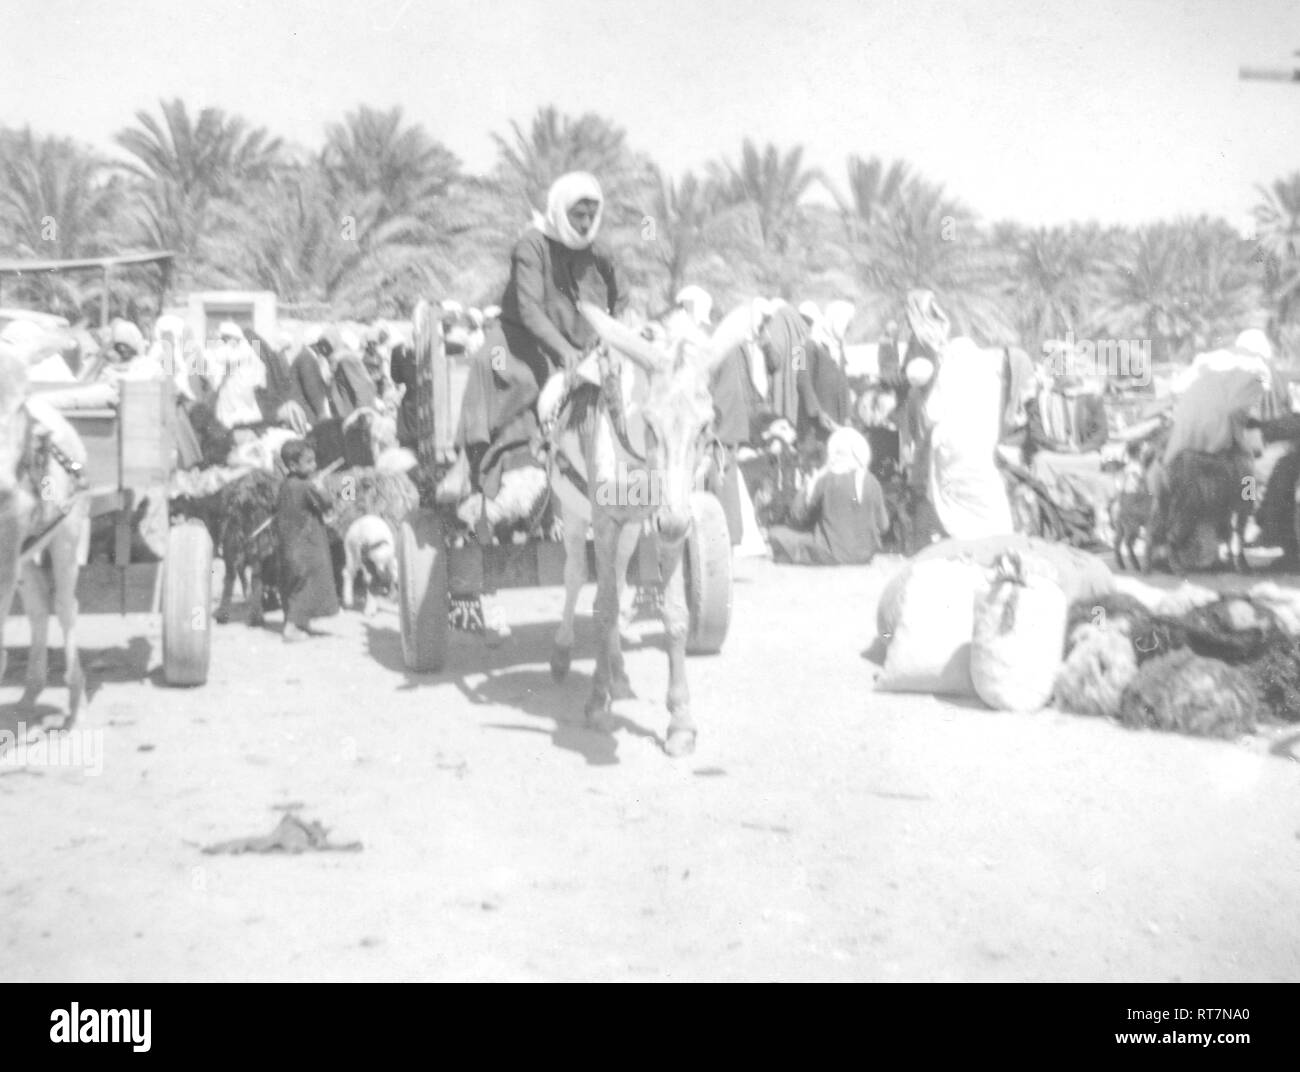 Scenes from a Day Trip to Al-Hofuf (Hofuf), Al-Ahsa, Saudi Arabia on a sunny winter day in 1968. Stock Photo